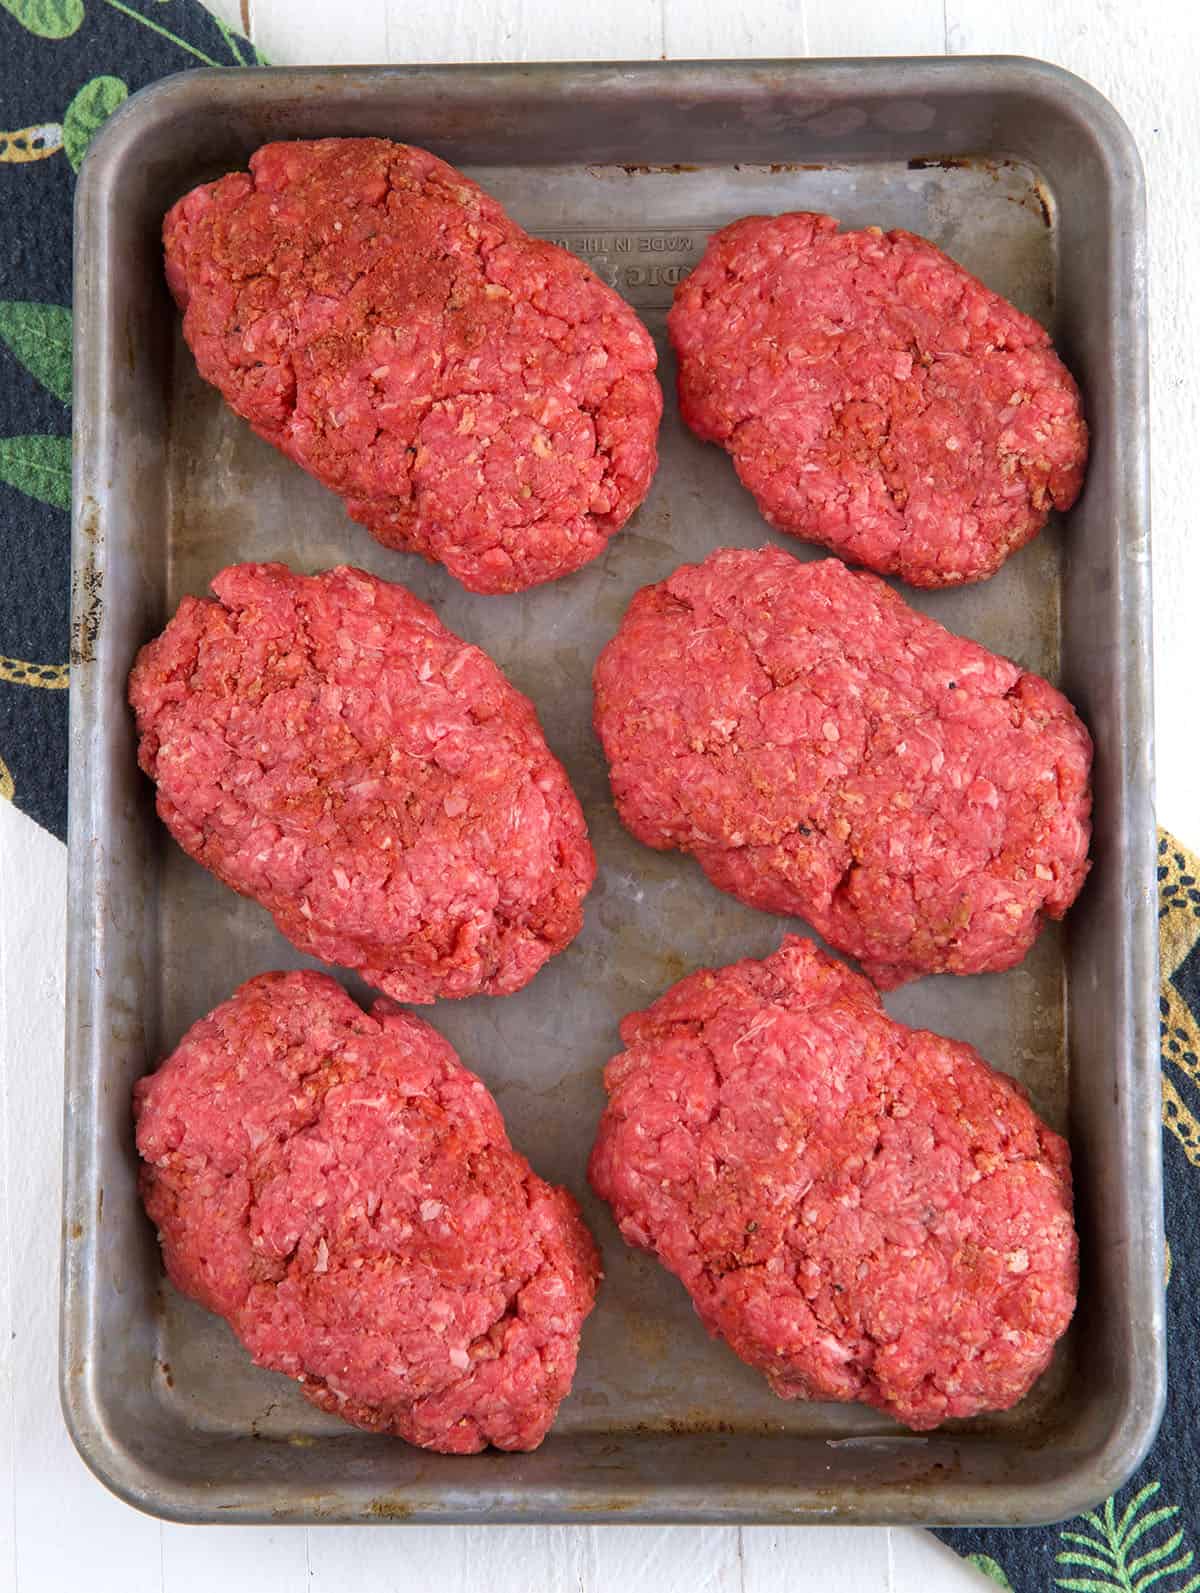 Ground beef formed into oval patties for Salisbury Steak on a baking sheet.